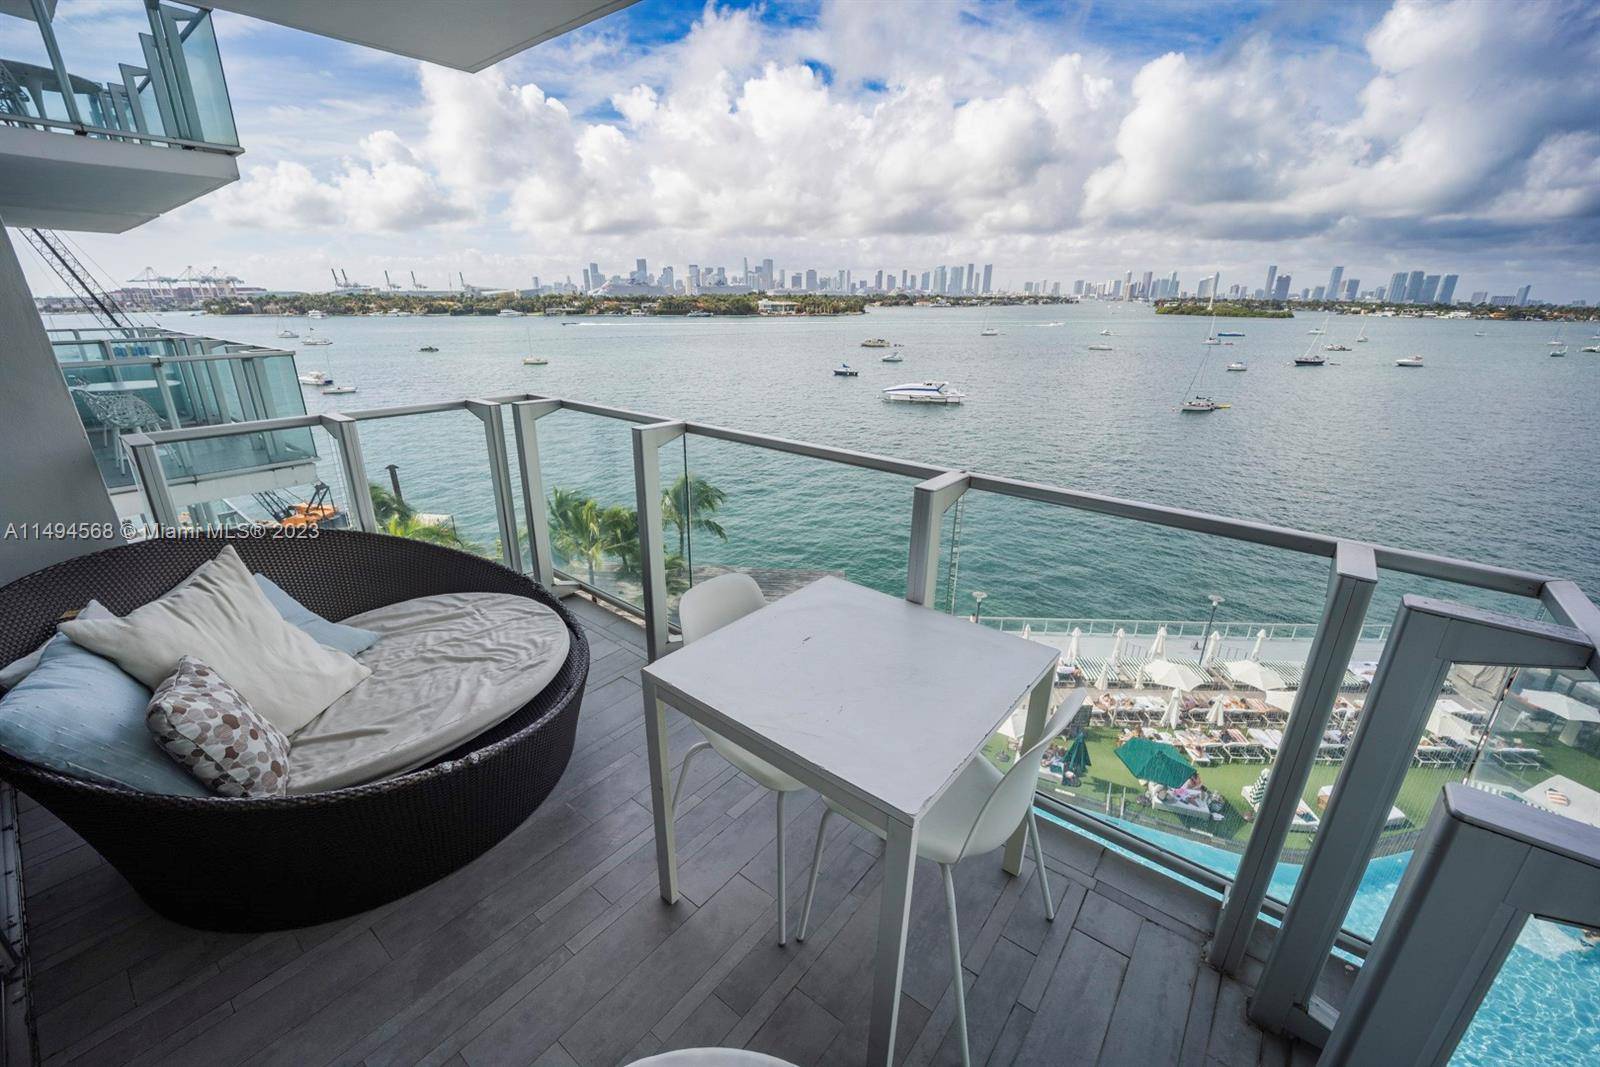 This unit is located at the luxurious Mondrian South Beach.